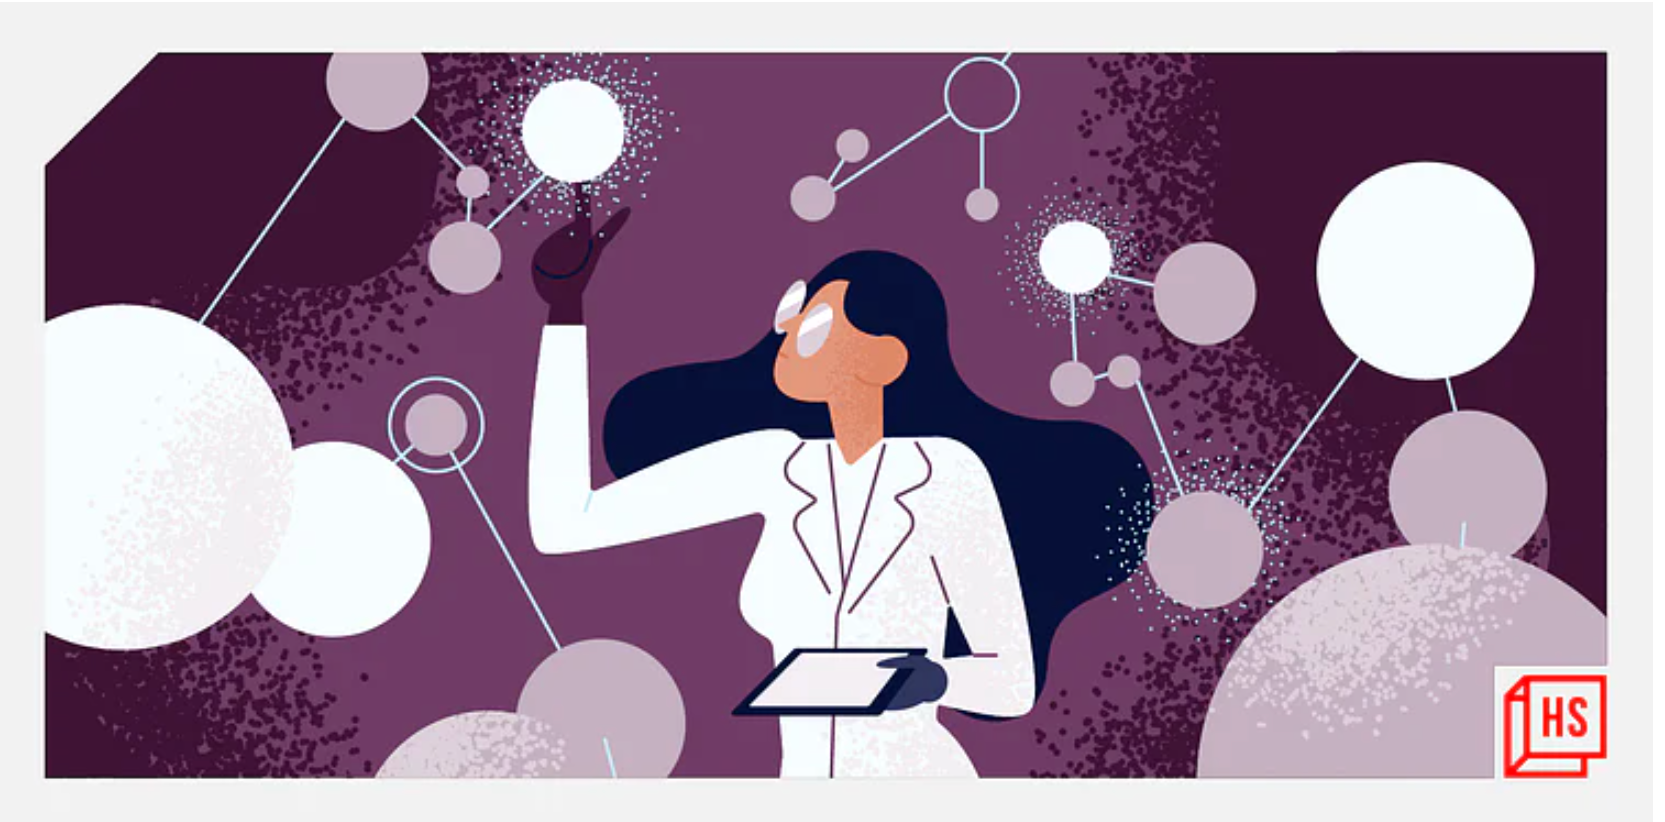 Why Indian companies need to focus on hiring more women in STEM fields

